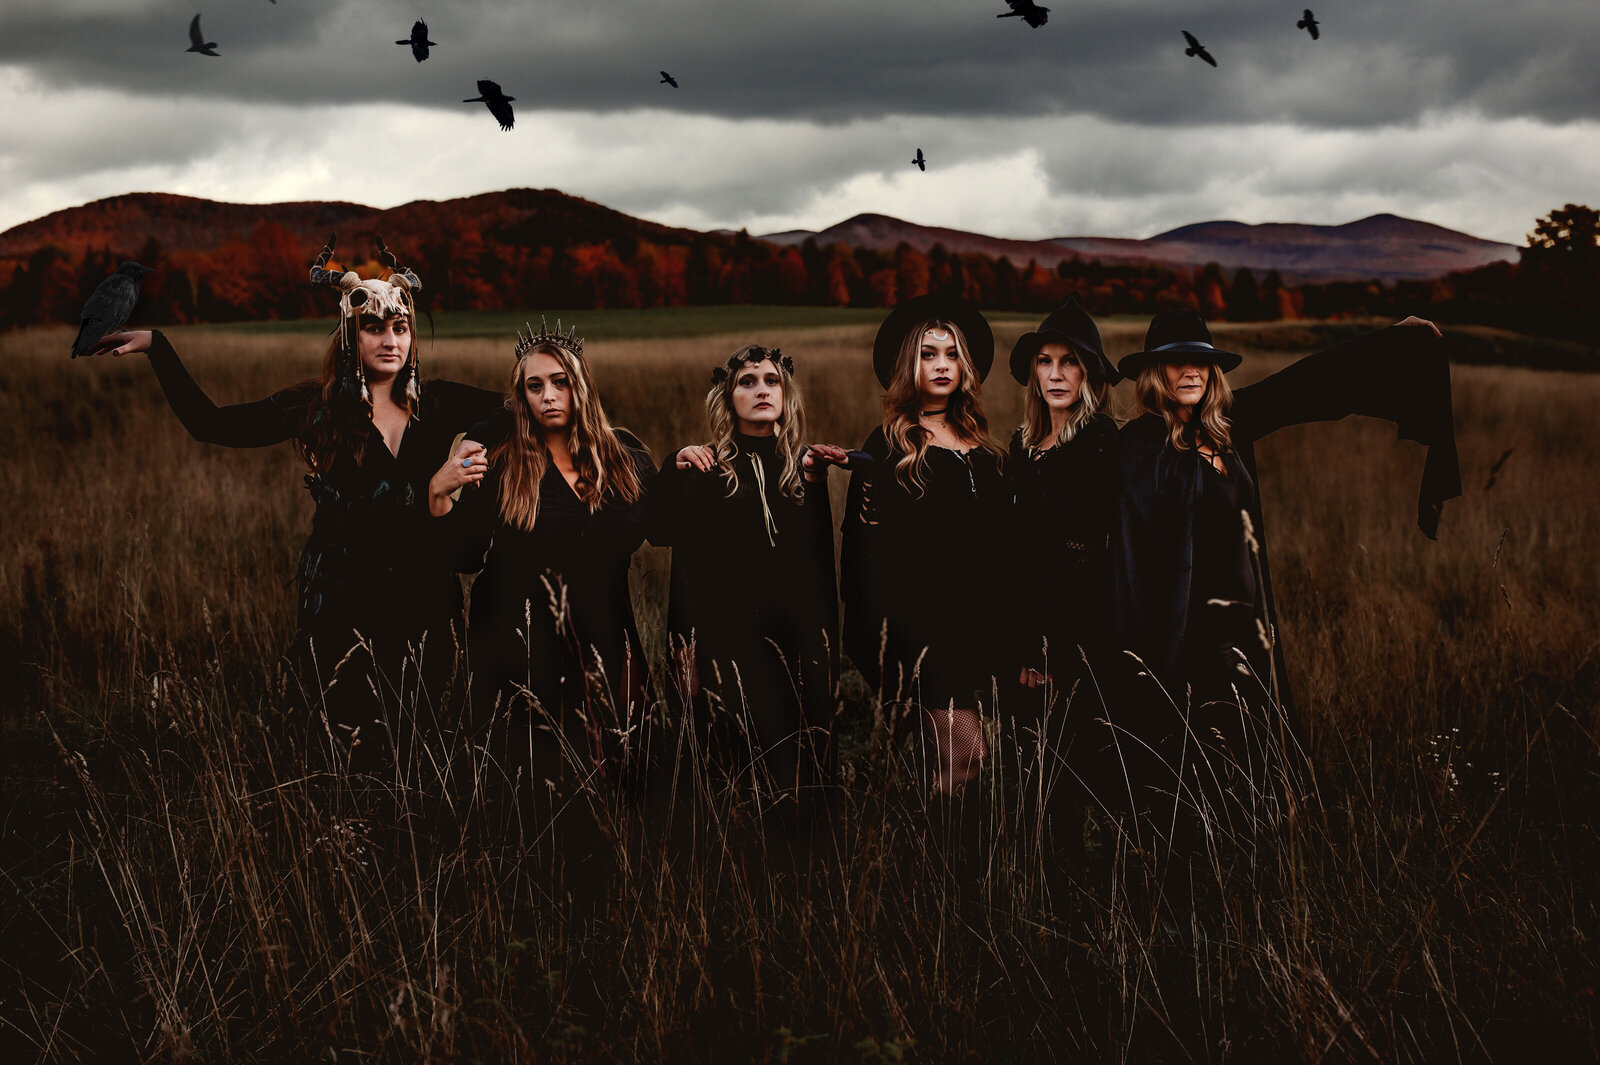 Witches coven shoot